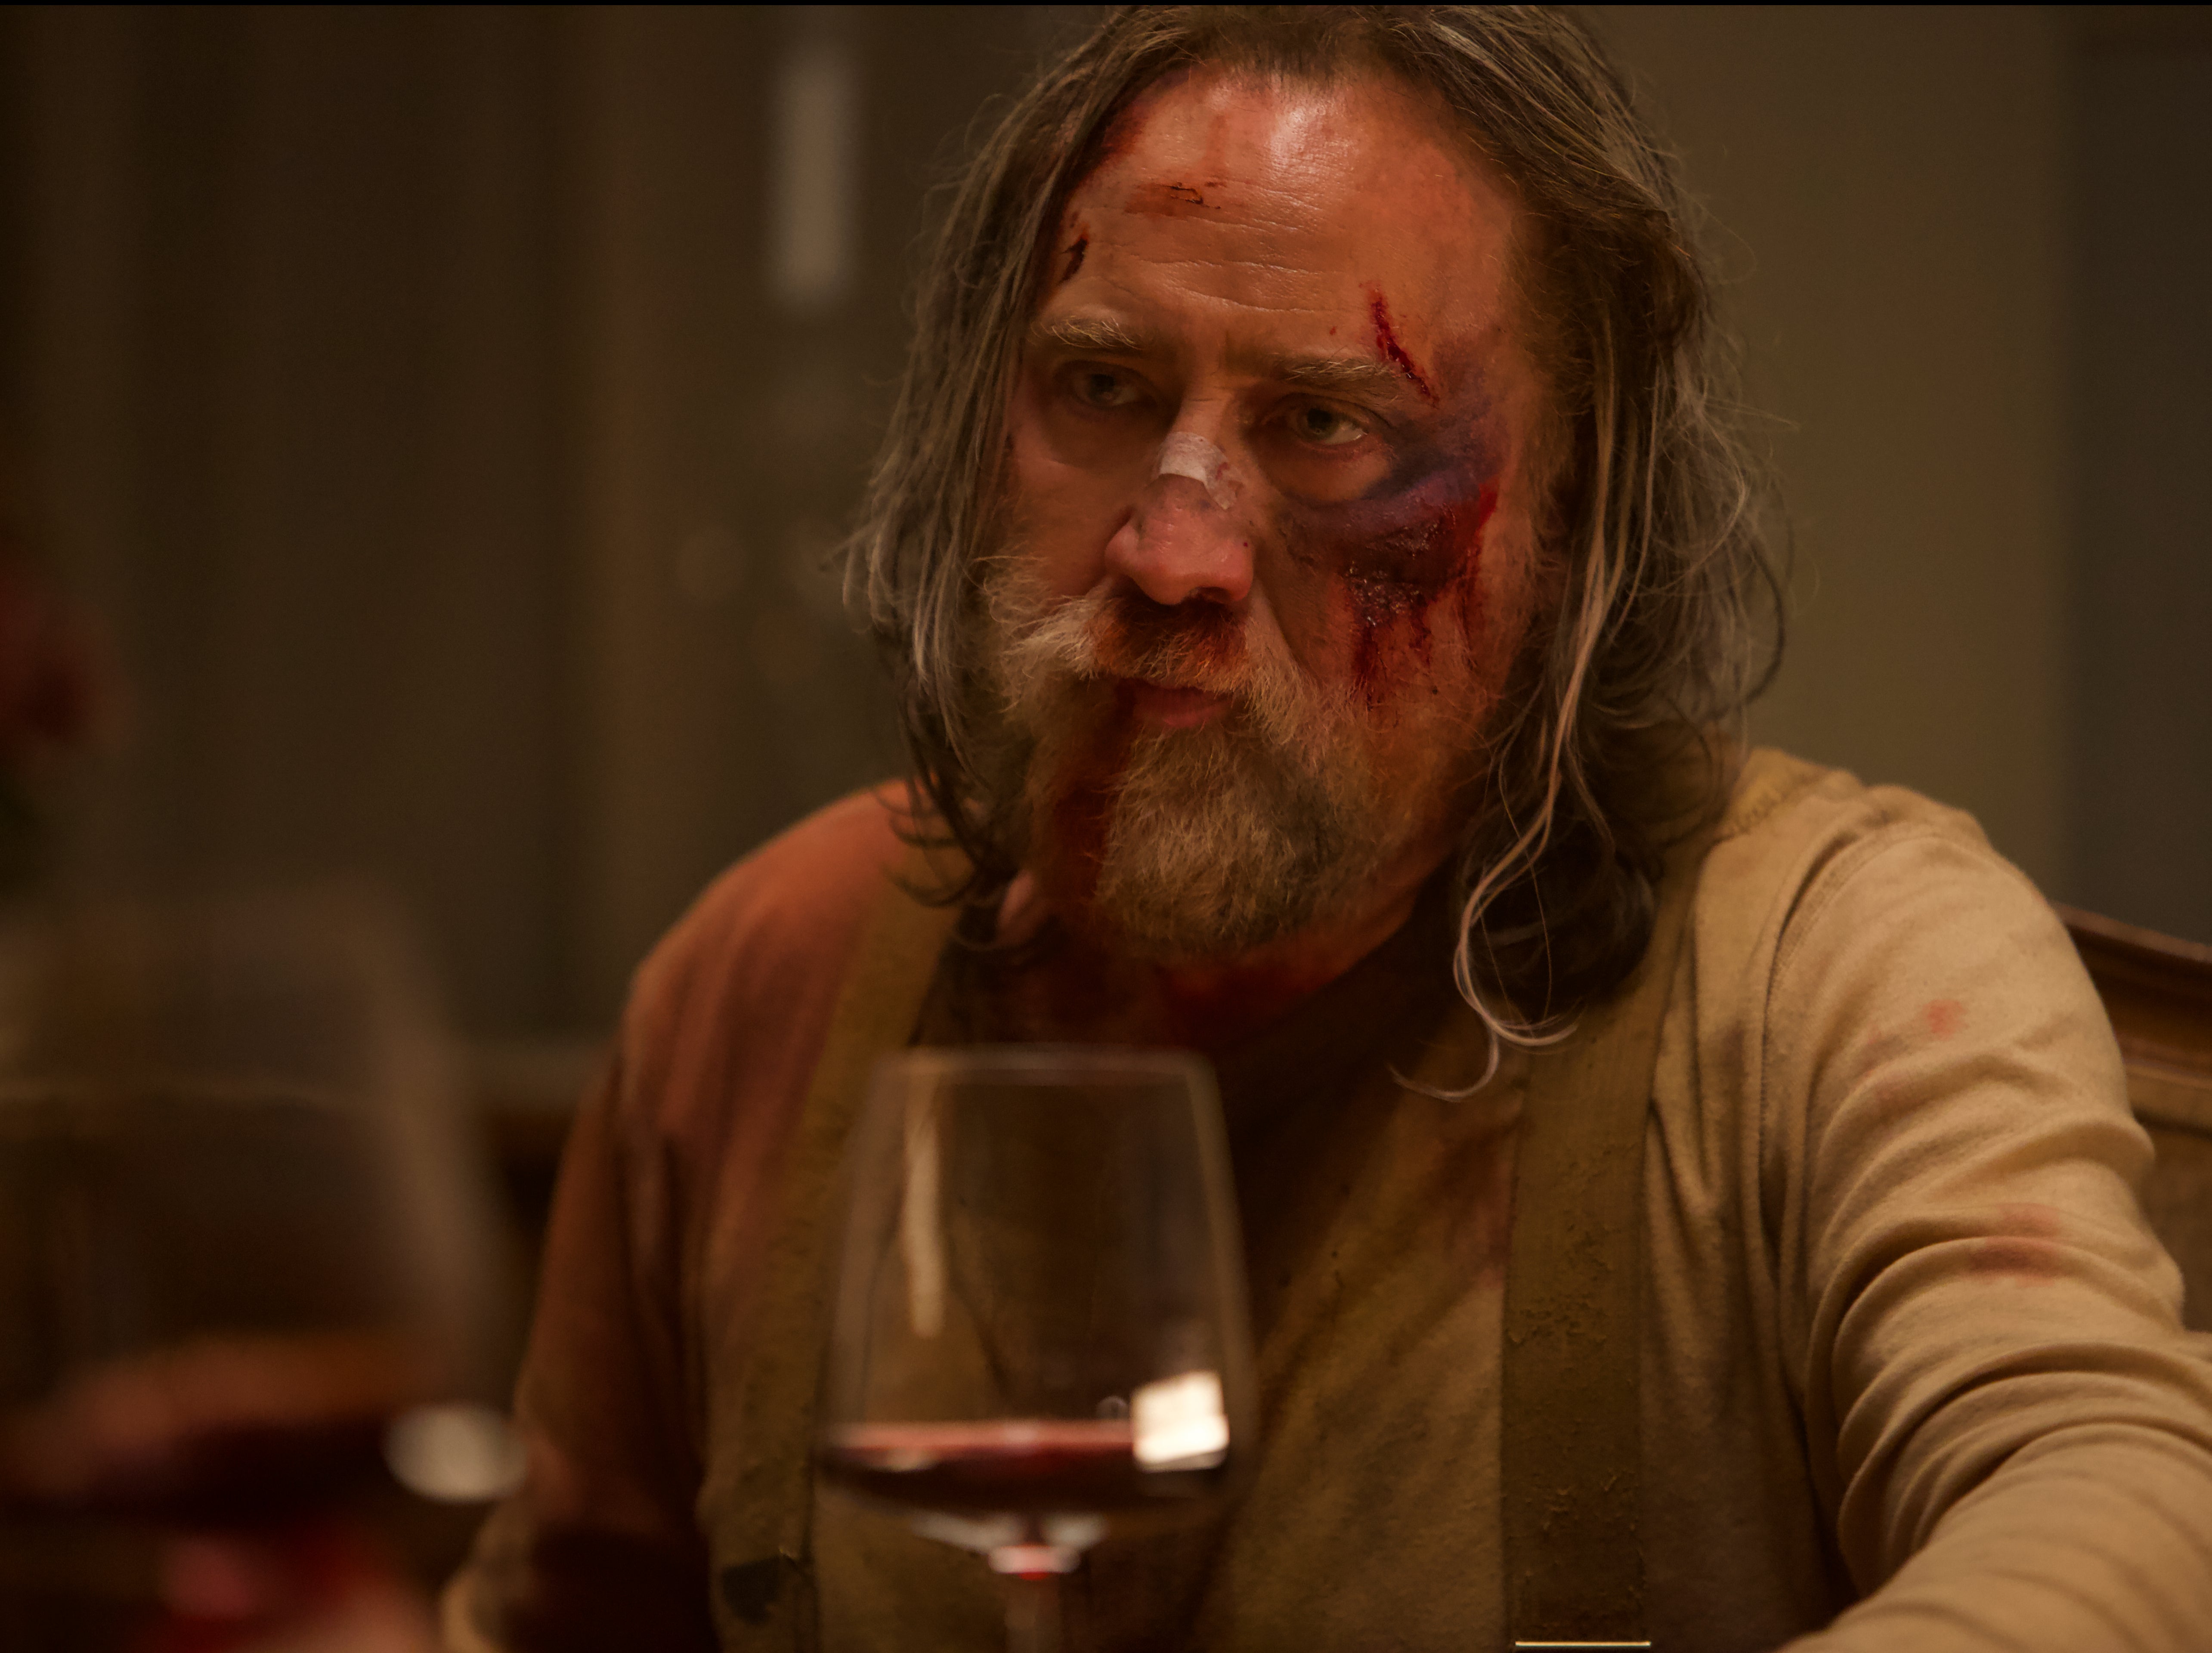 Nicolas Cage’s Rob is half-hidden behind his mountain-man beard, straggly hair, clotted blood, and dishevelled clothes